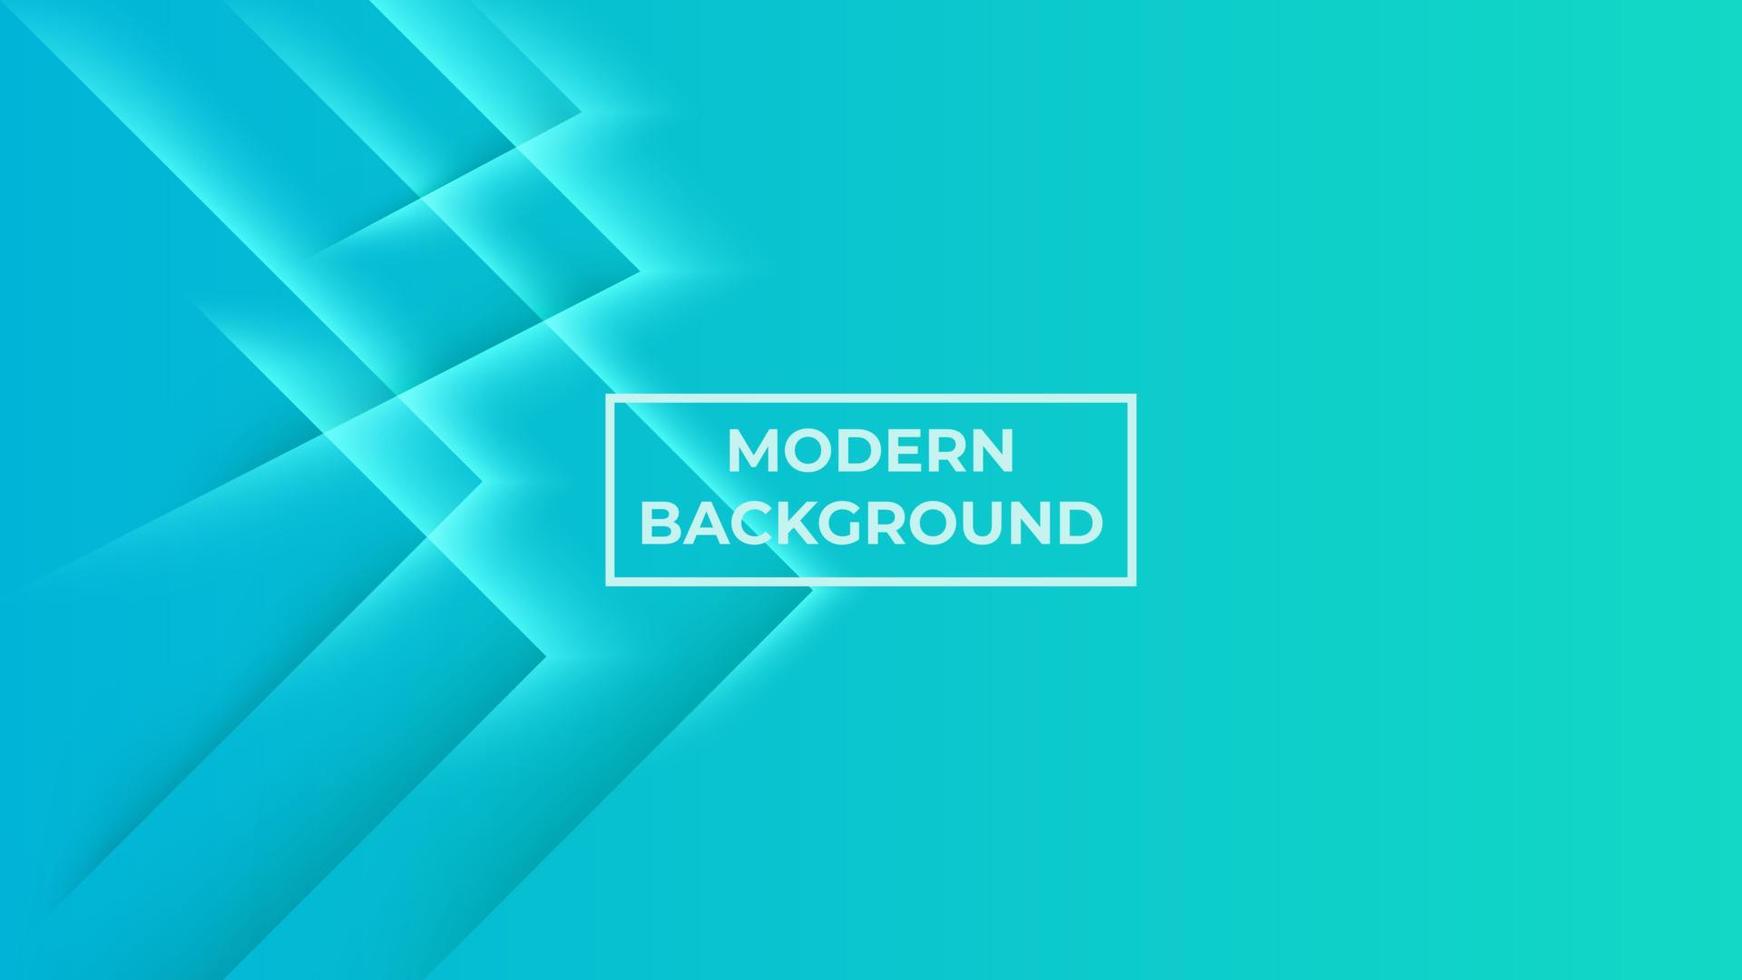 Modern background with teal color that forms a curved line that glows, easy to edit vector